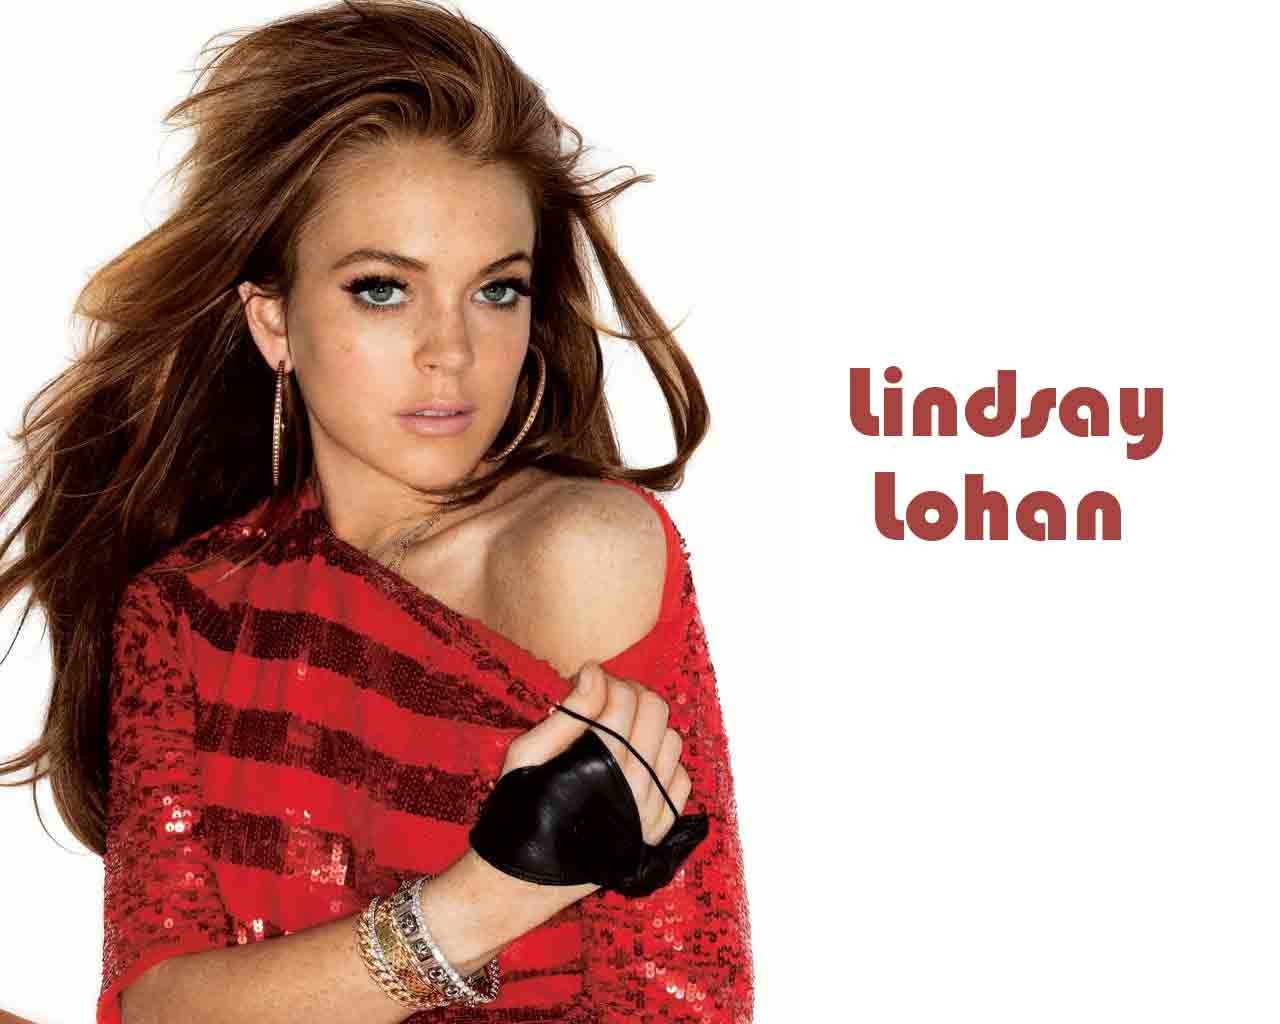 Lindsay Lohan HD and Wide Wallpapers